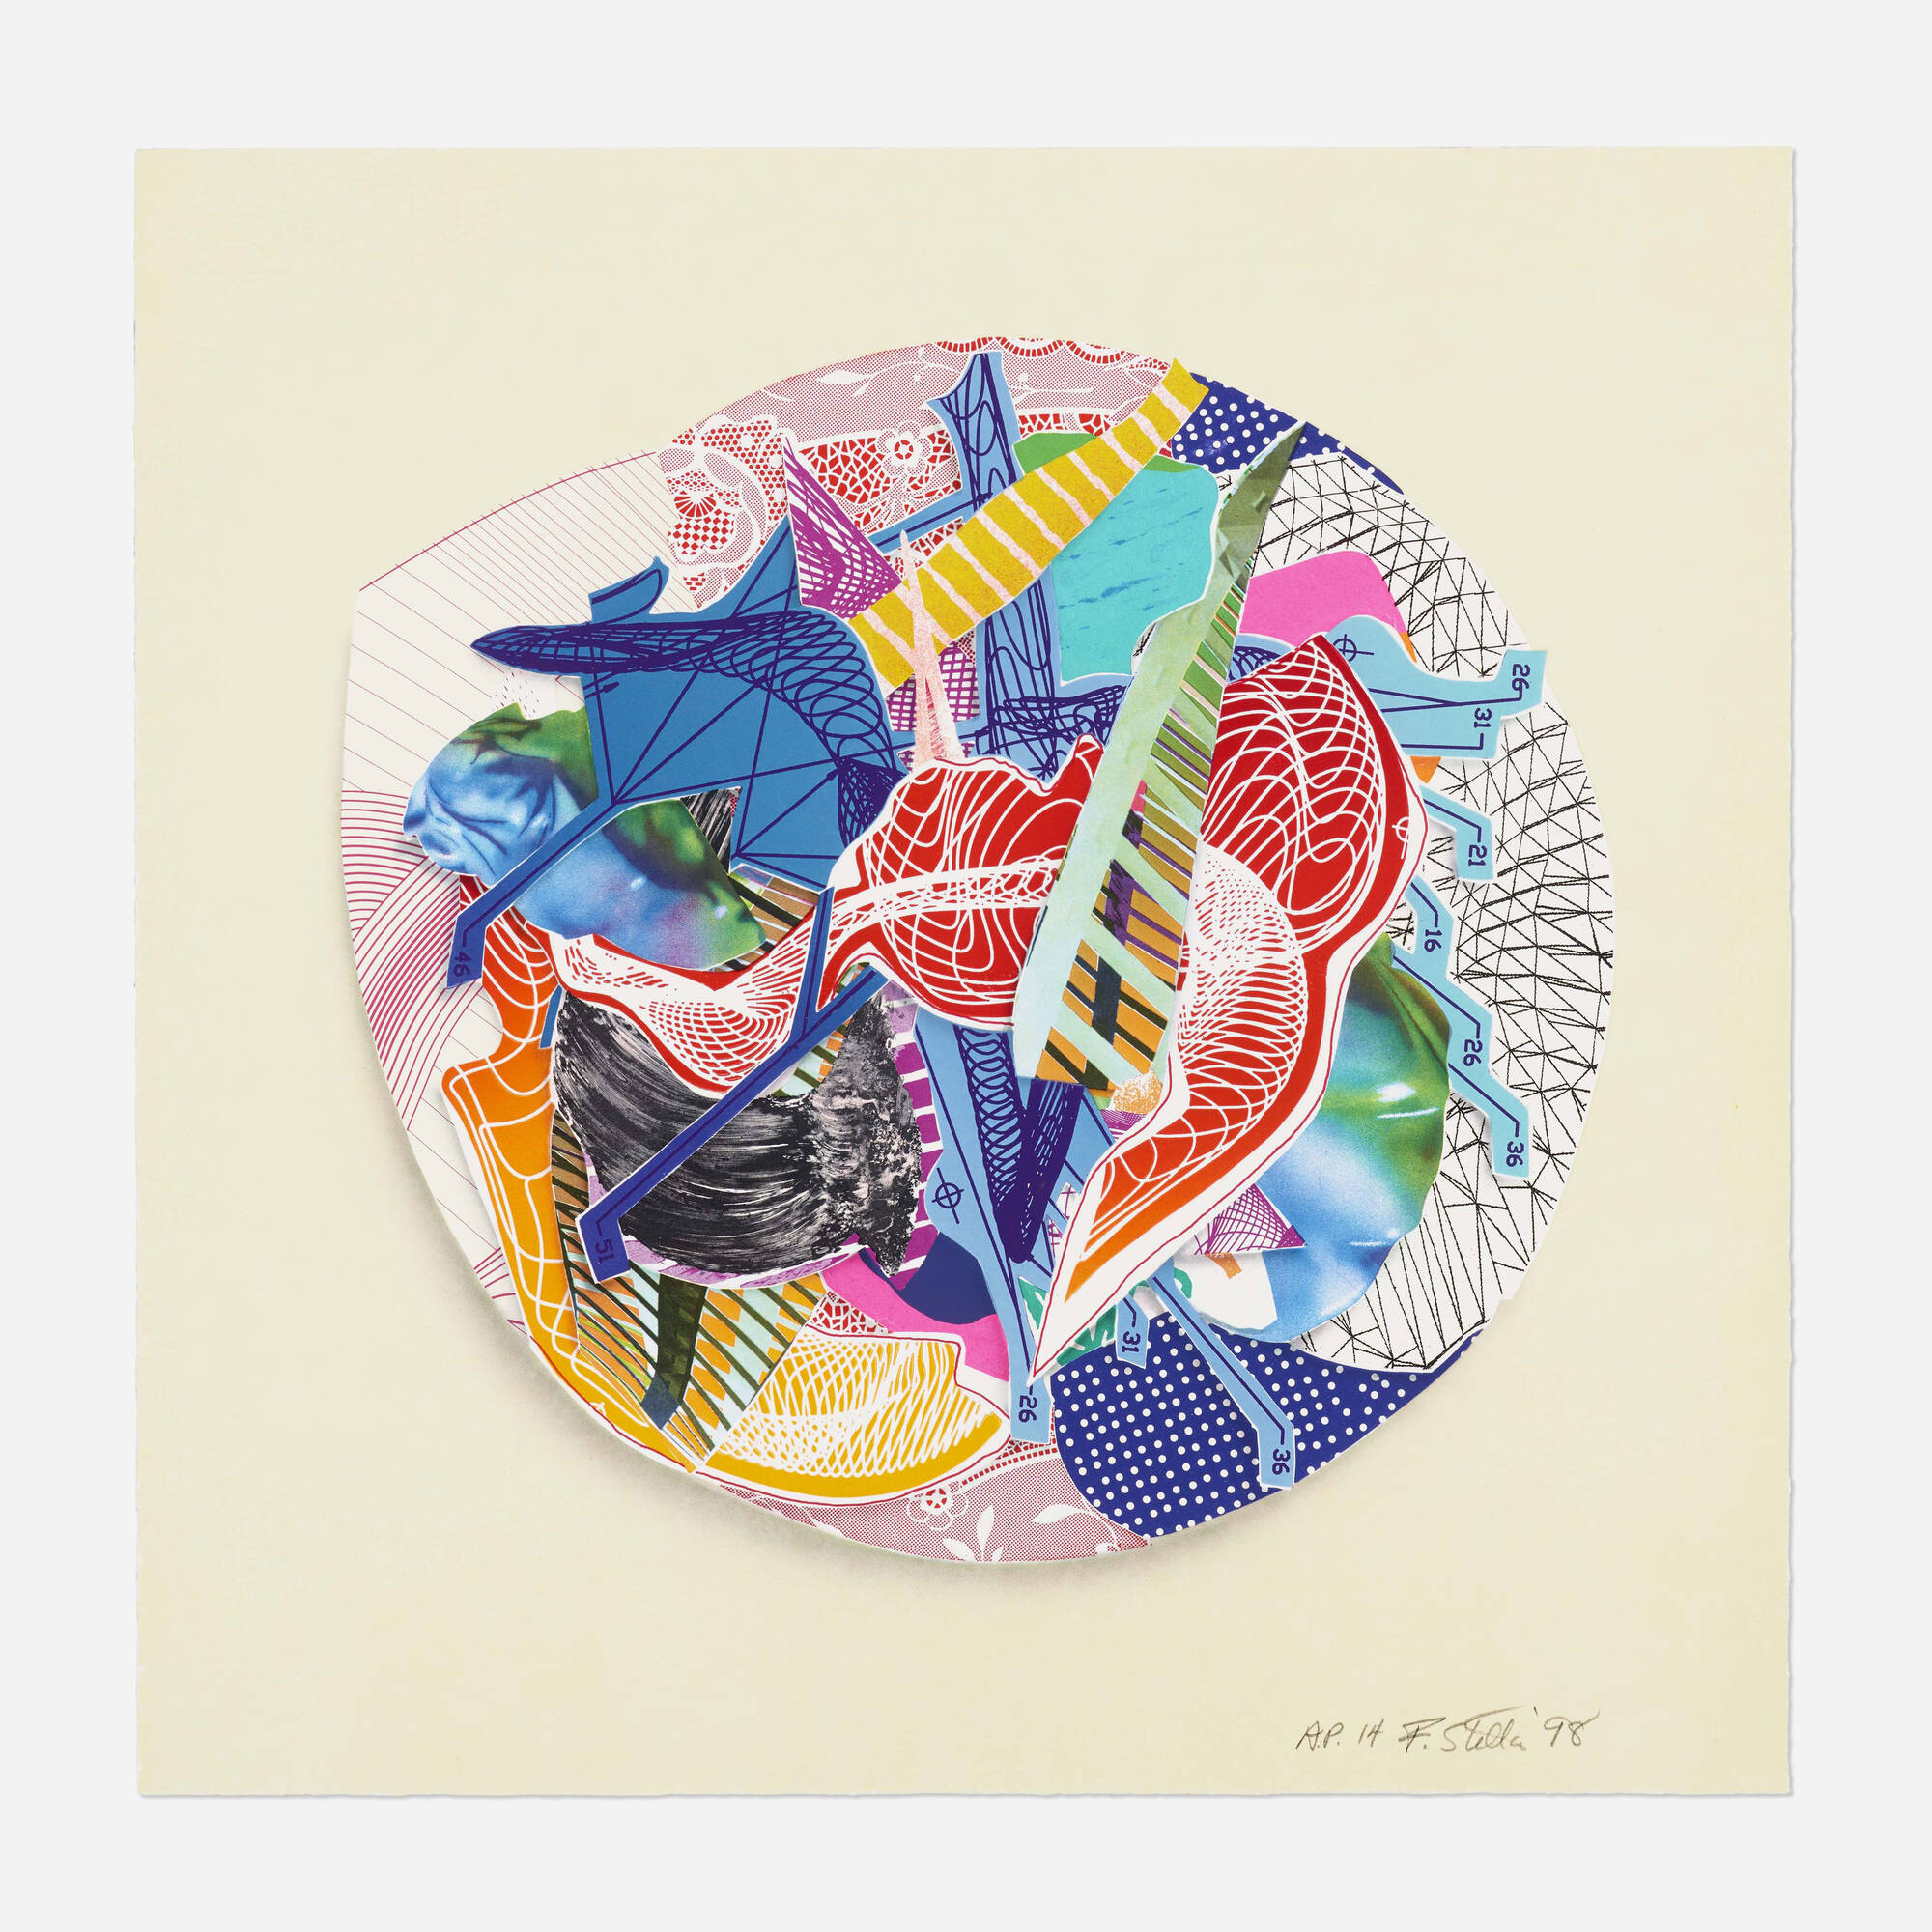 353: FRANK STELLA, Eusapia (from the Imaginary Places III series) < Prints  + Multiples, 16 June 2022 < Auctions | Rago Auctions